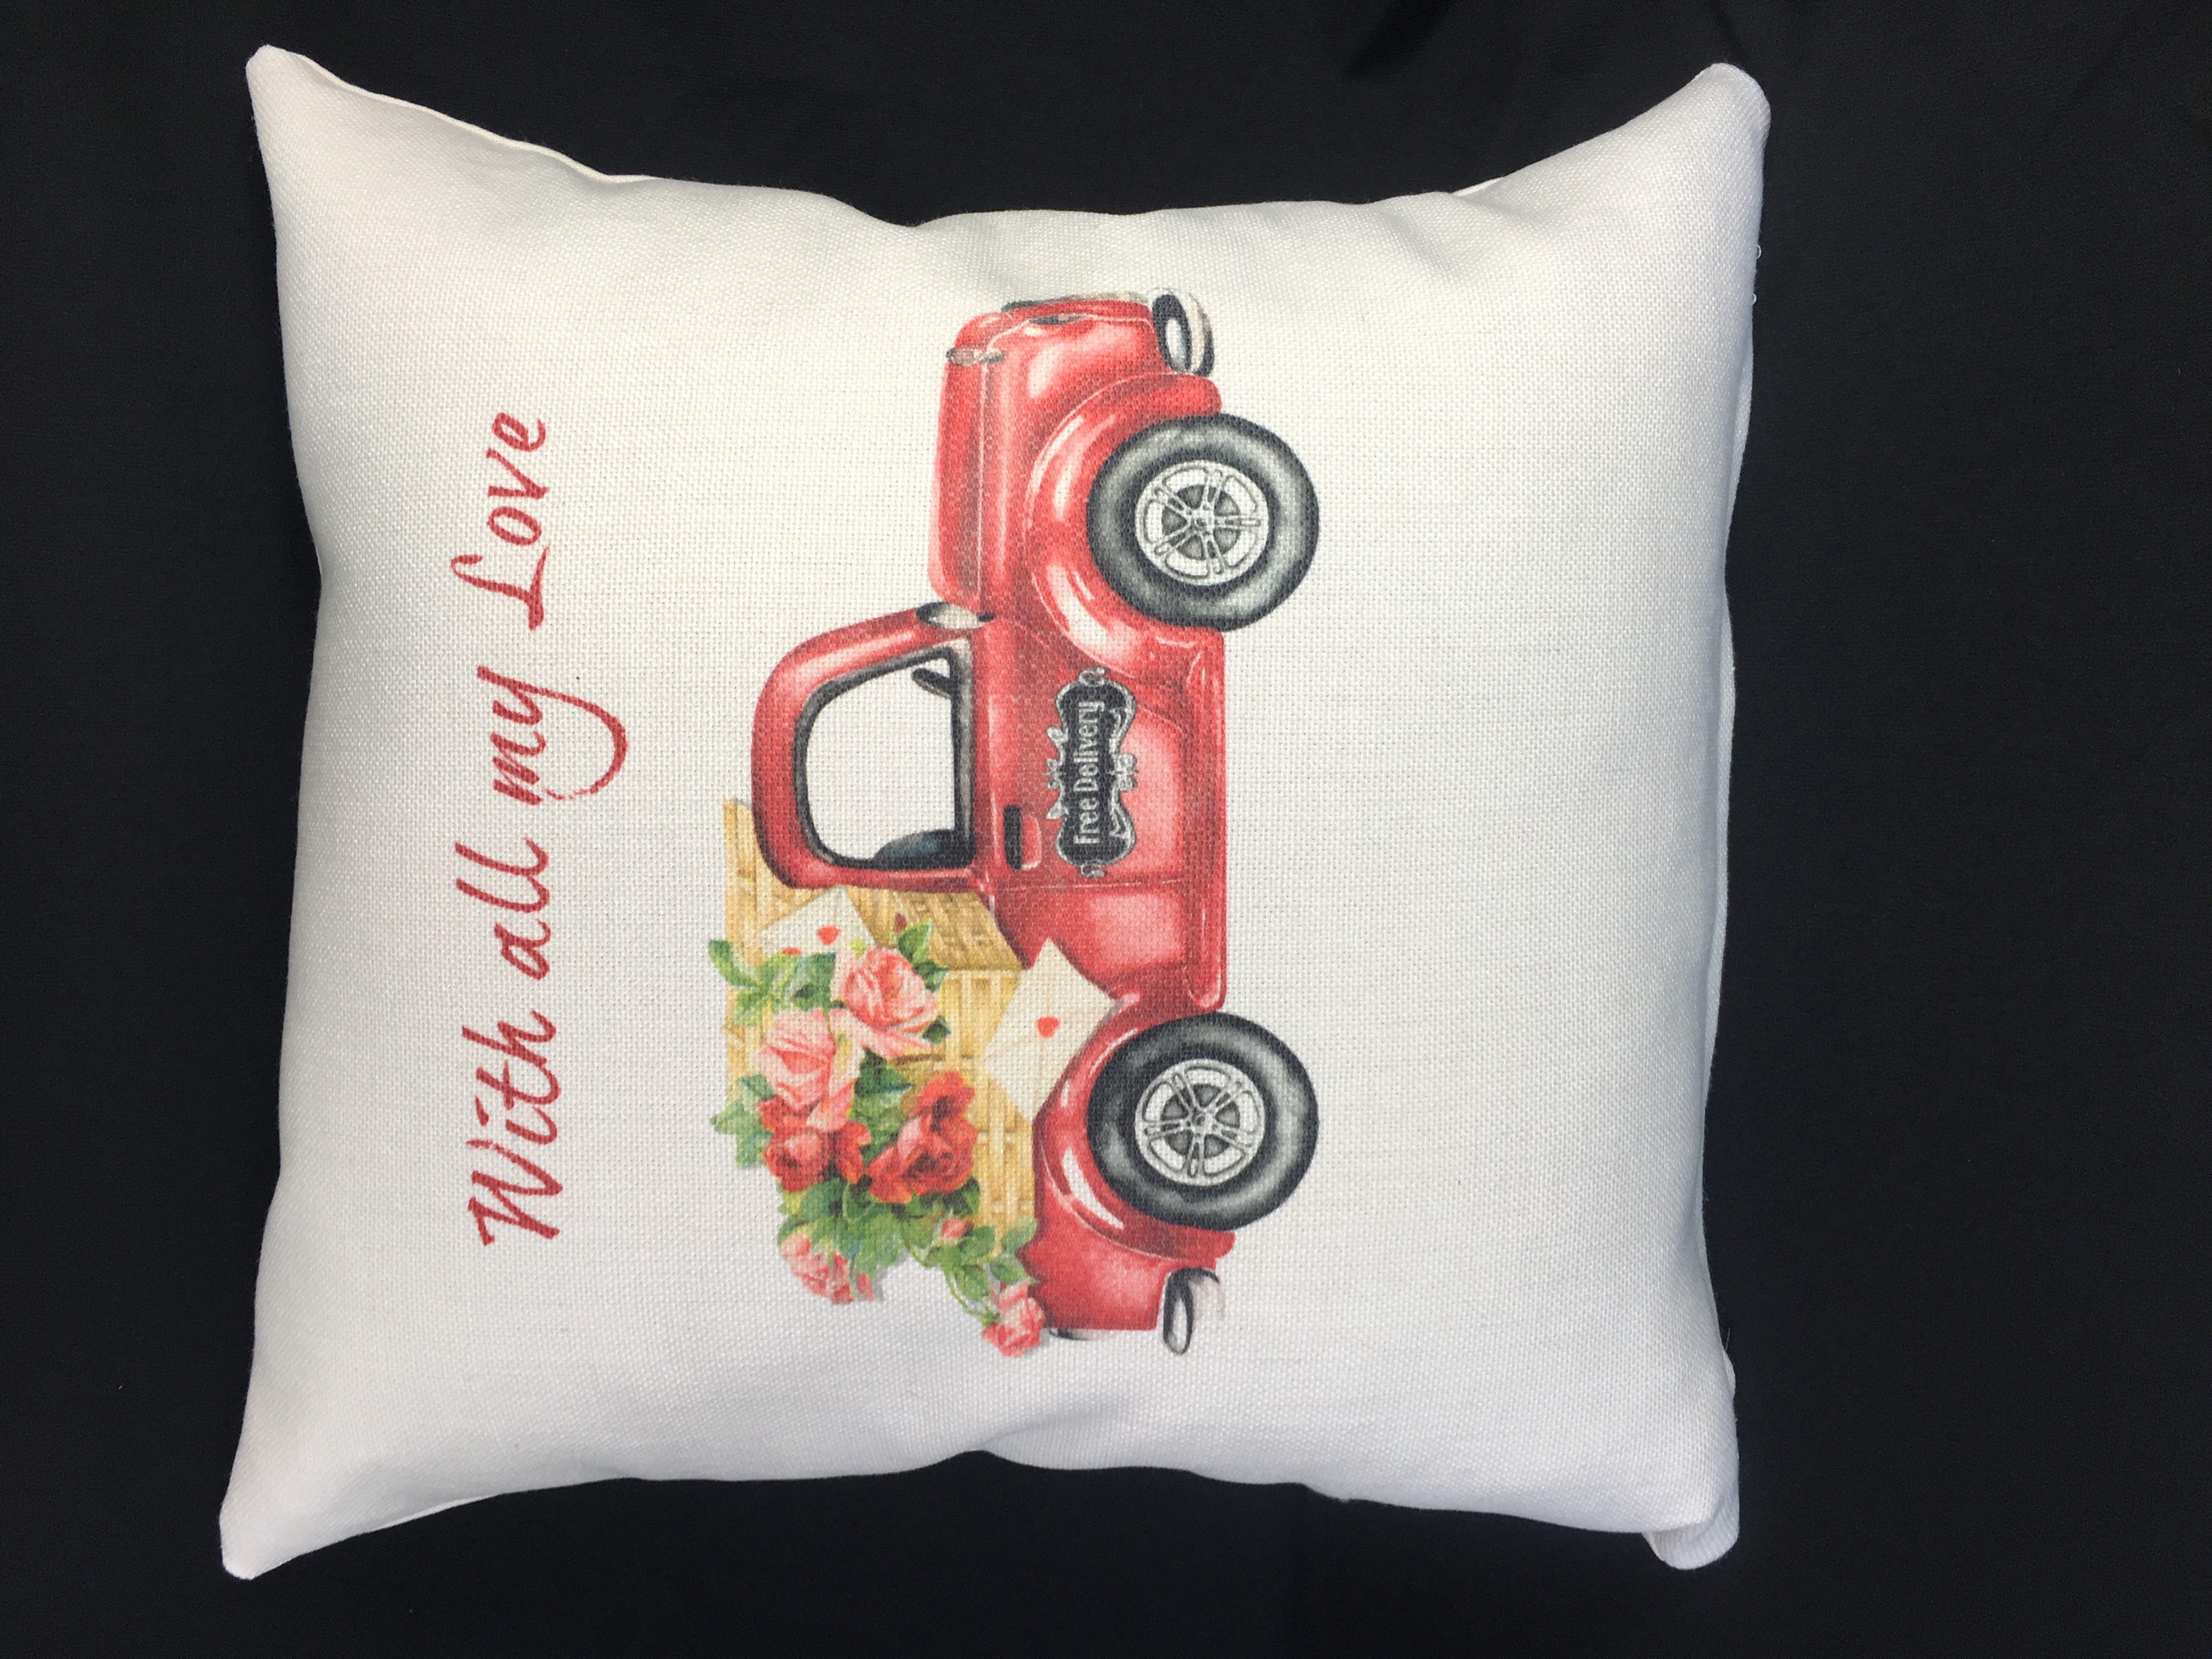 Truck Heart - Valentines Day made with sublimation printing